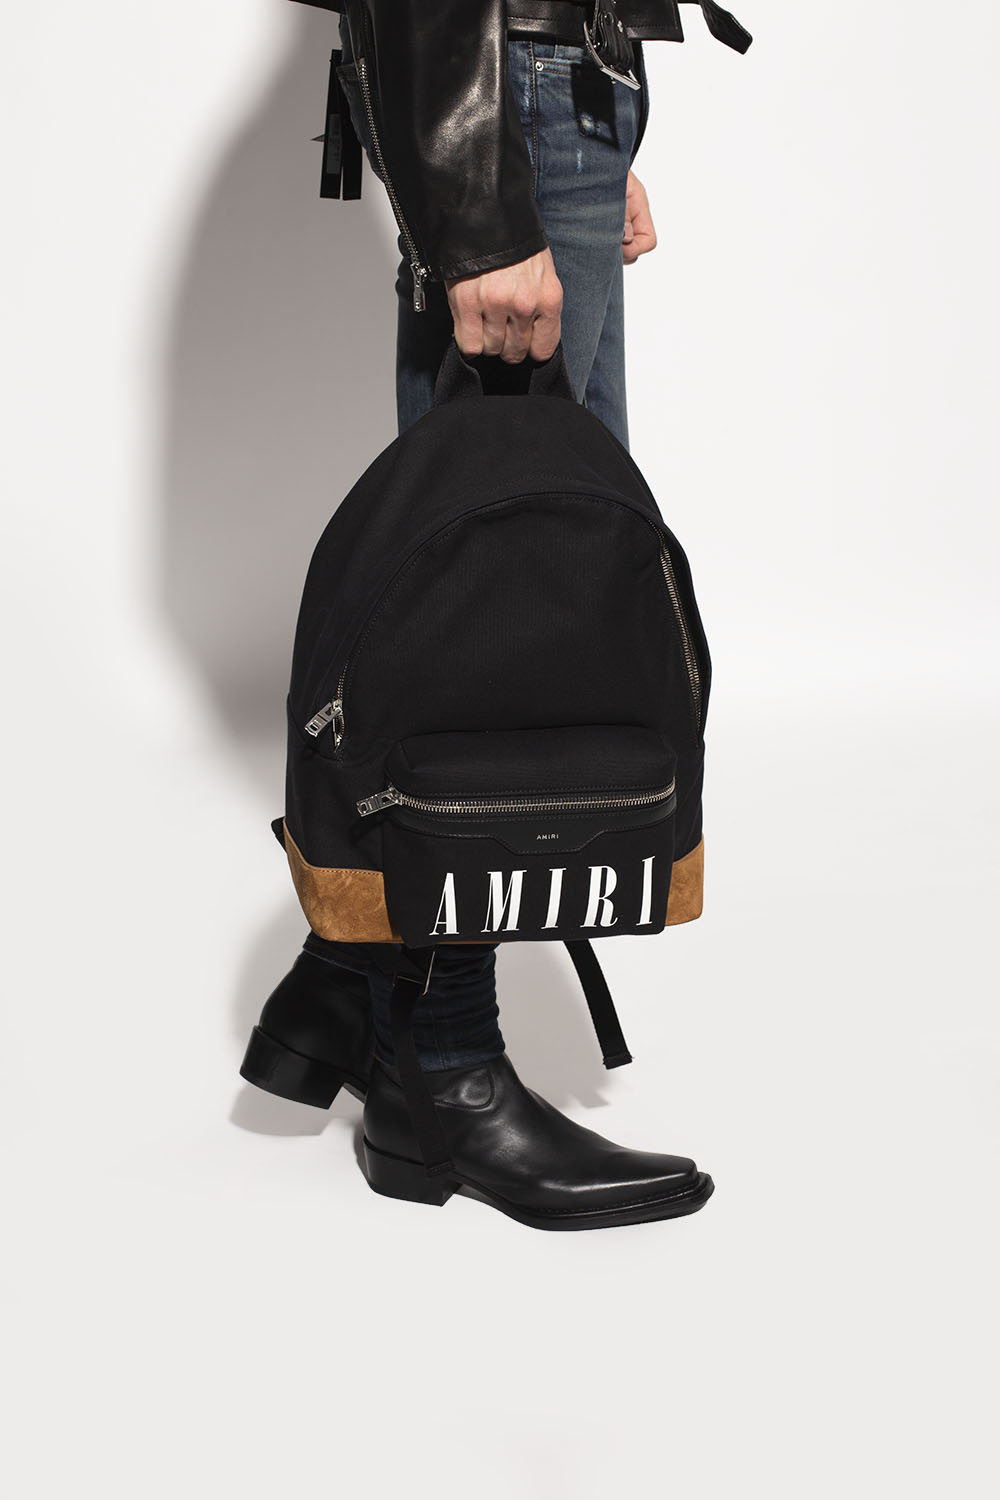 Amiri Feast Your Eyes on Gucci's Newest GG Marmont Leather Backpack